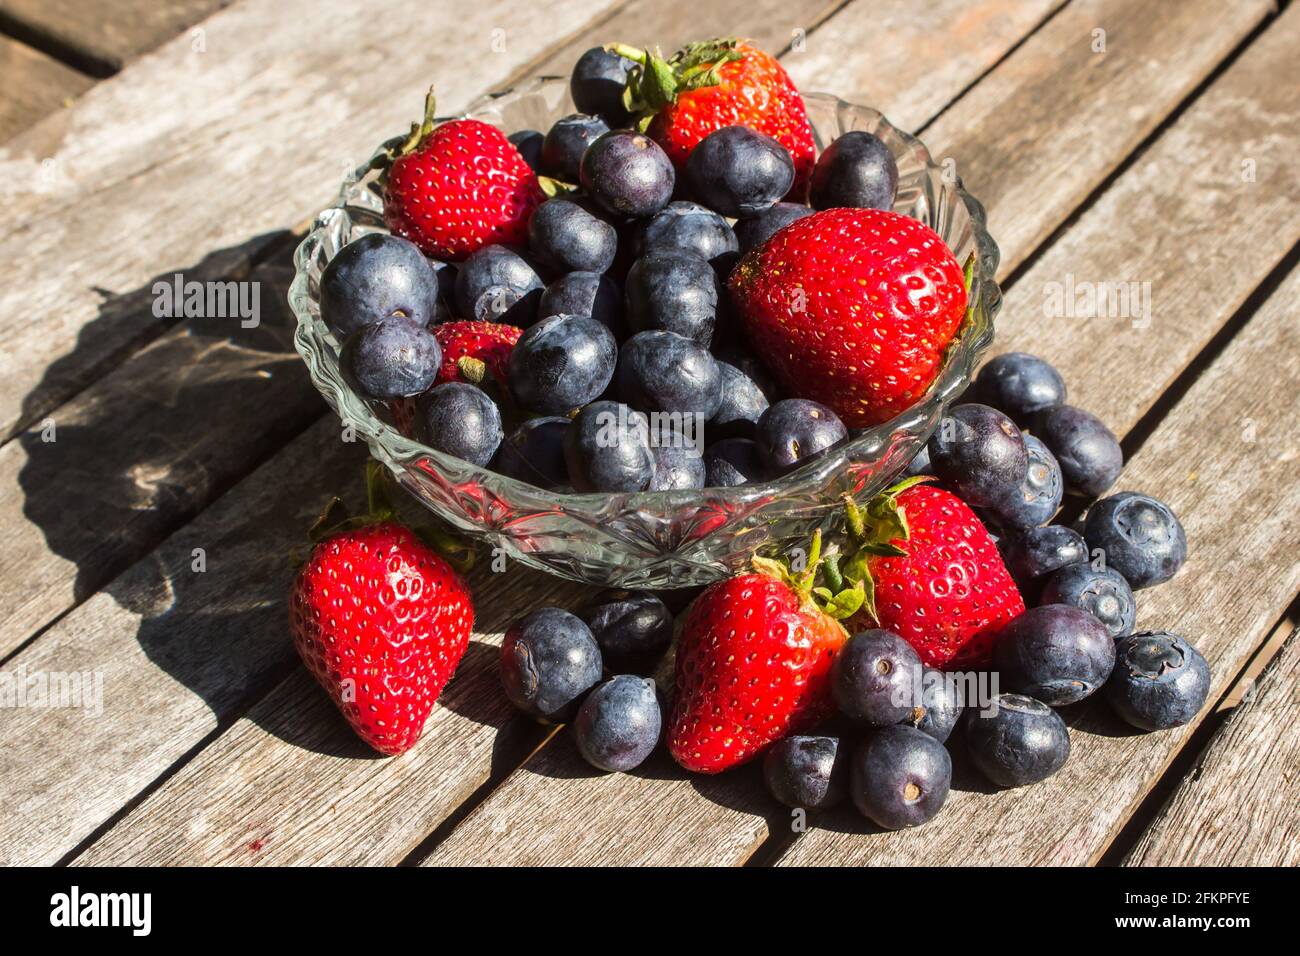 A glass bowl, filled to overflowing with bright red strawberries and indigo-colored blueberries on a weathered wooden surface Stock Photo